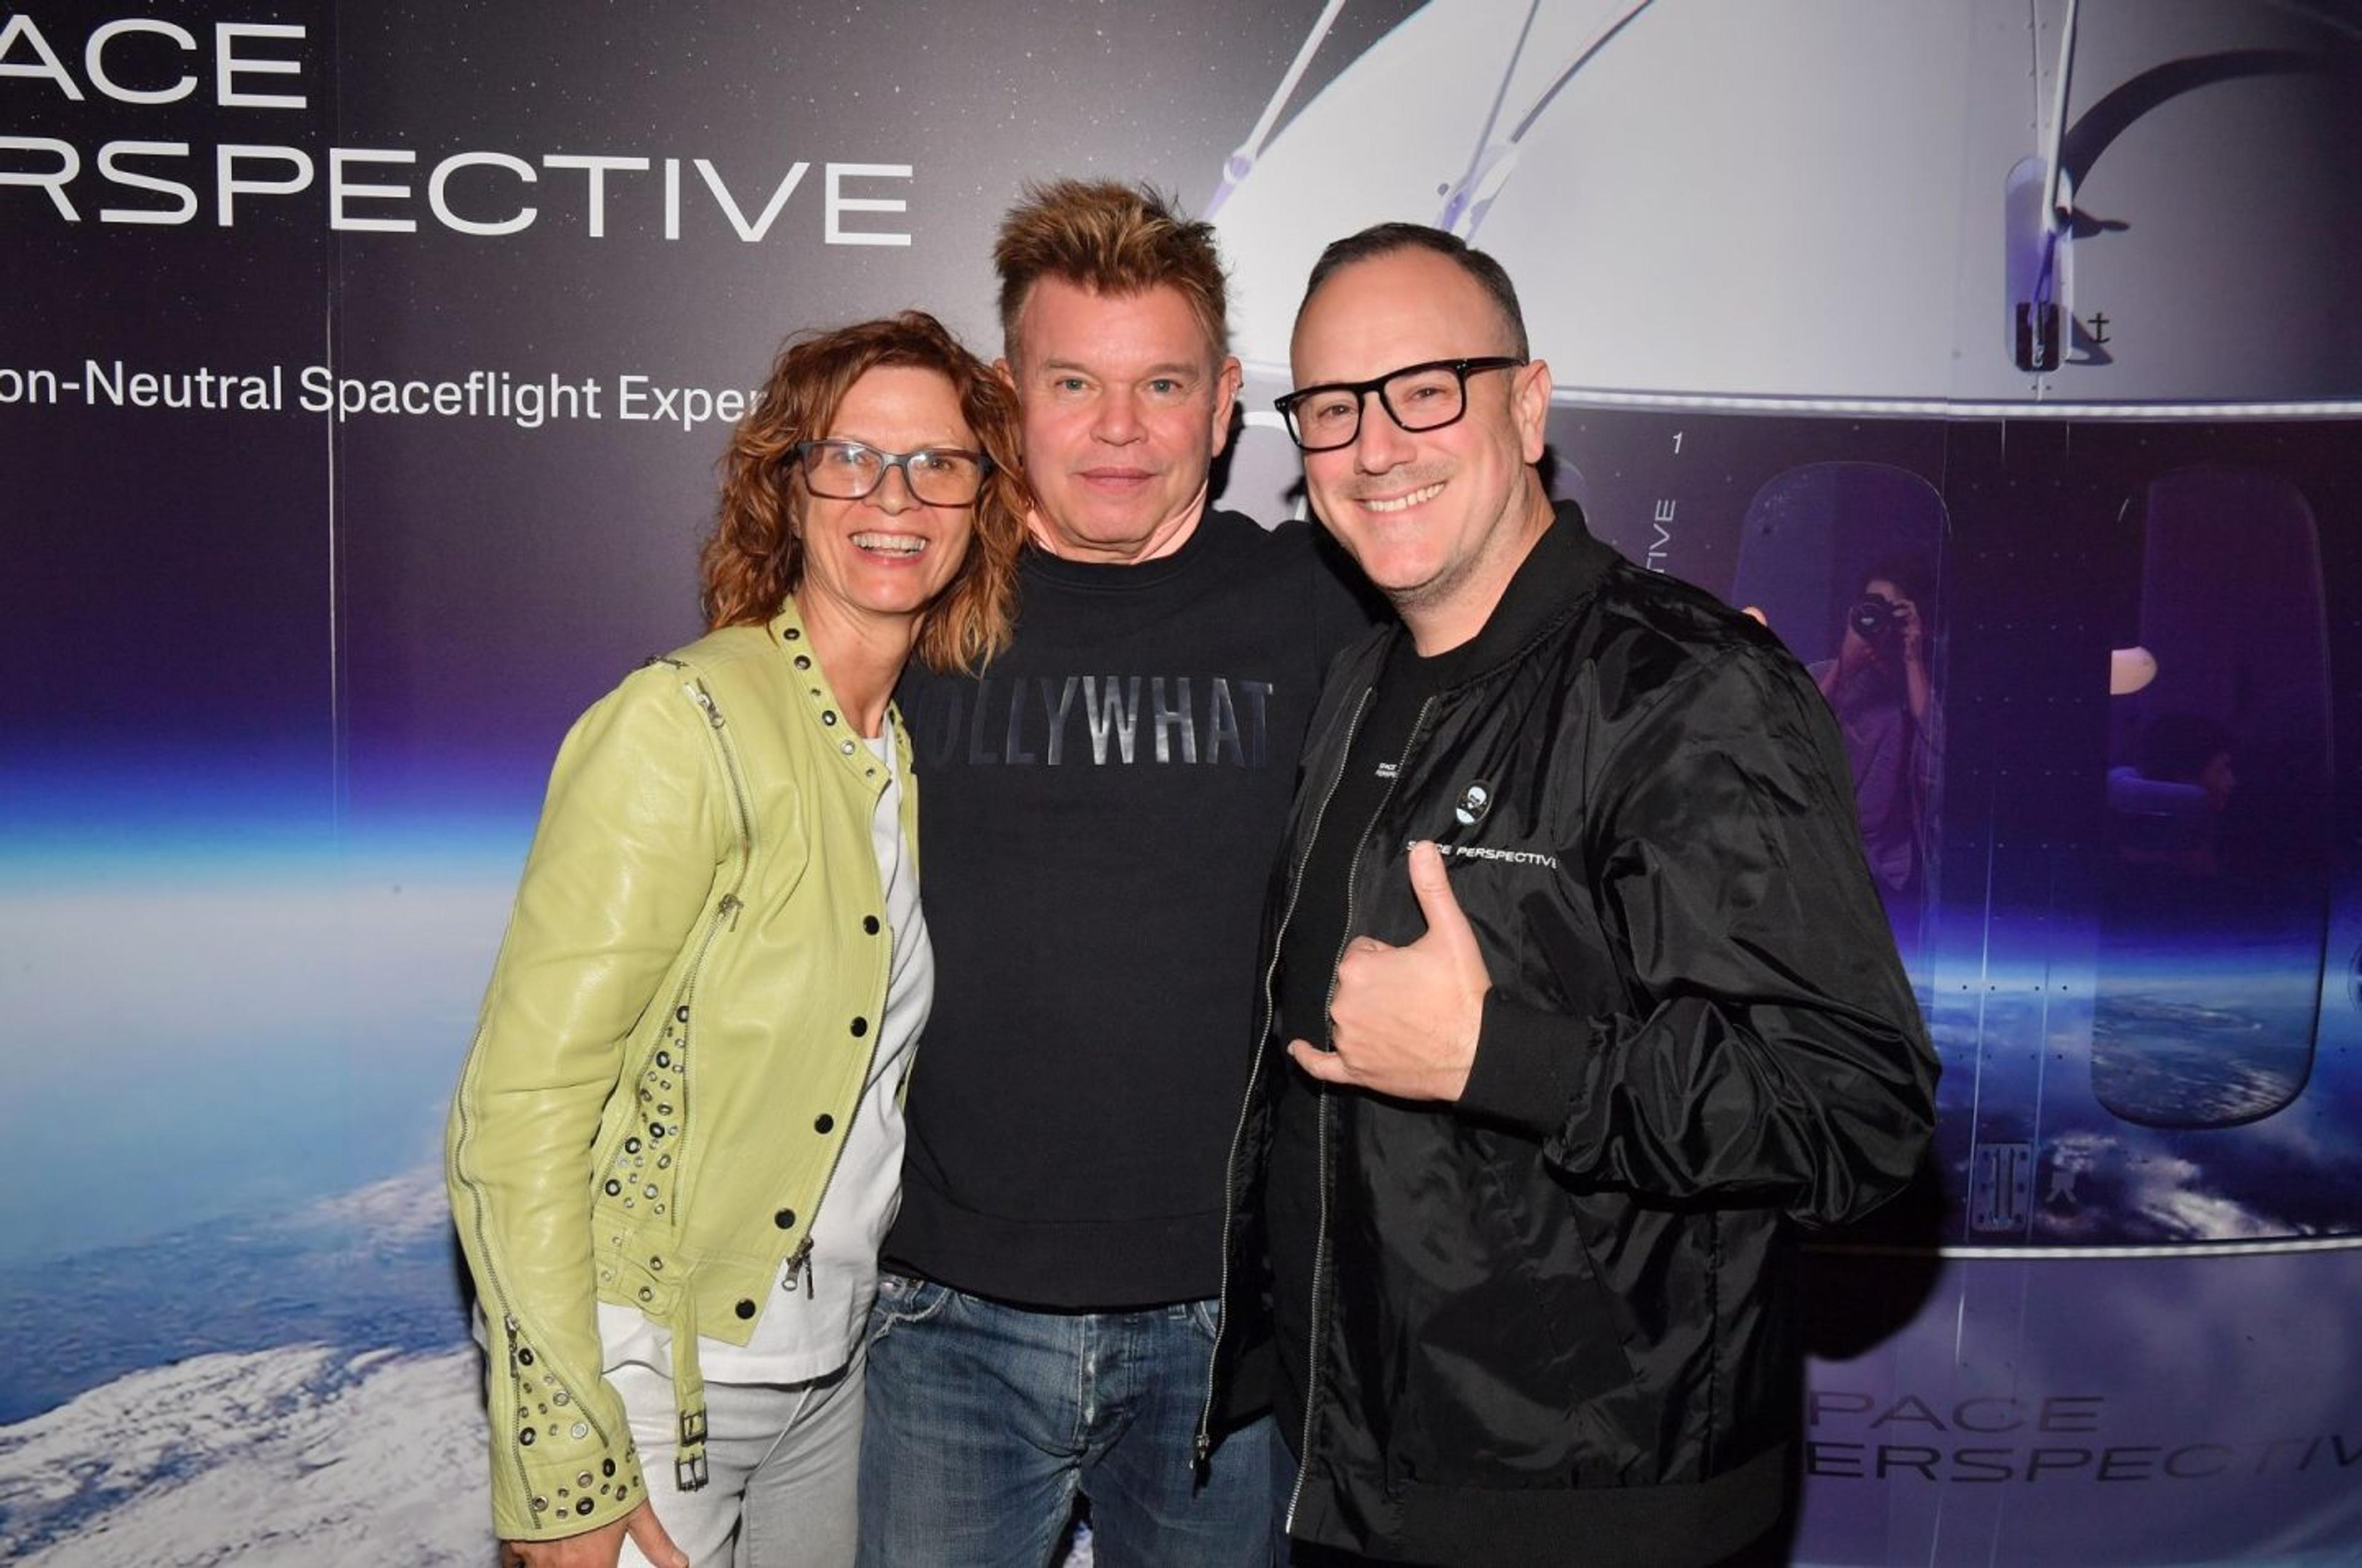 Space Perspective Hosts Devo & Guests for Sundance Film Premiere